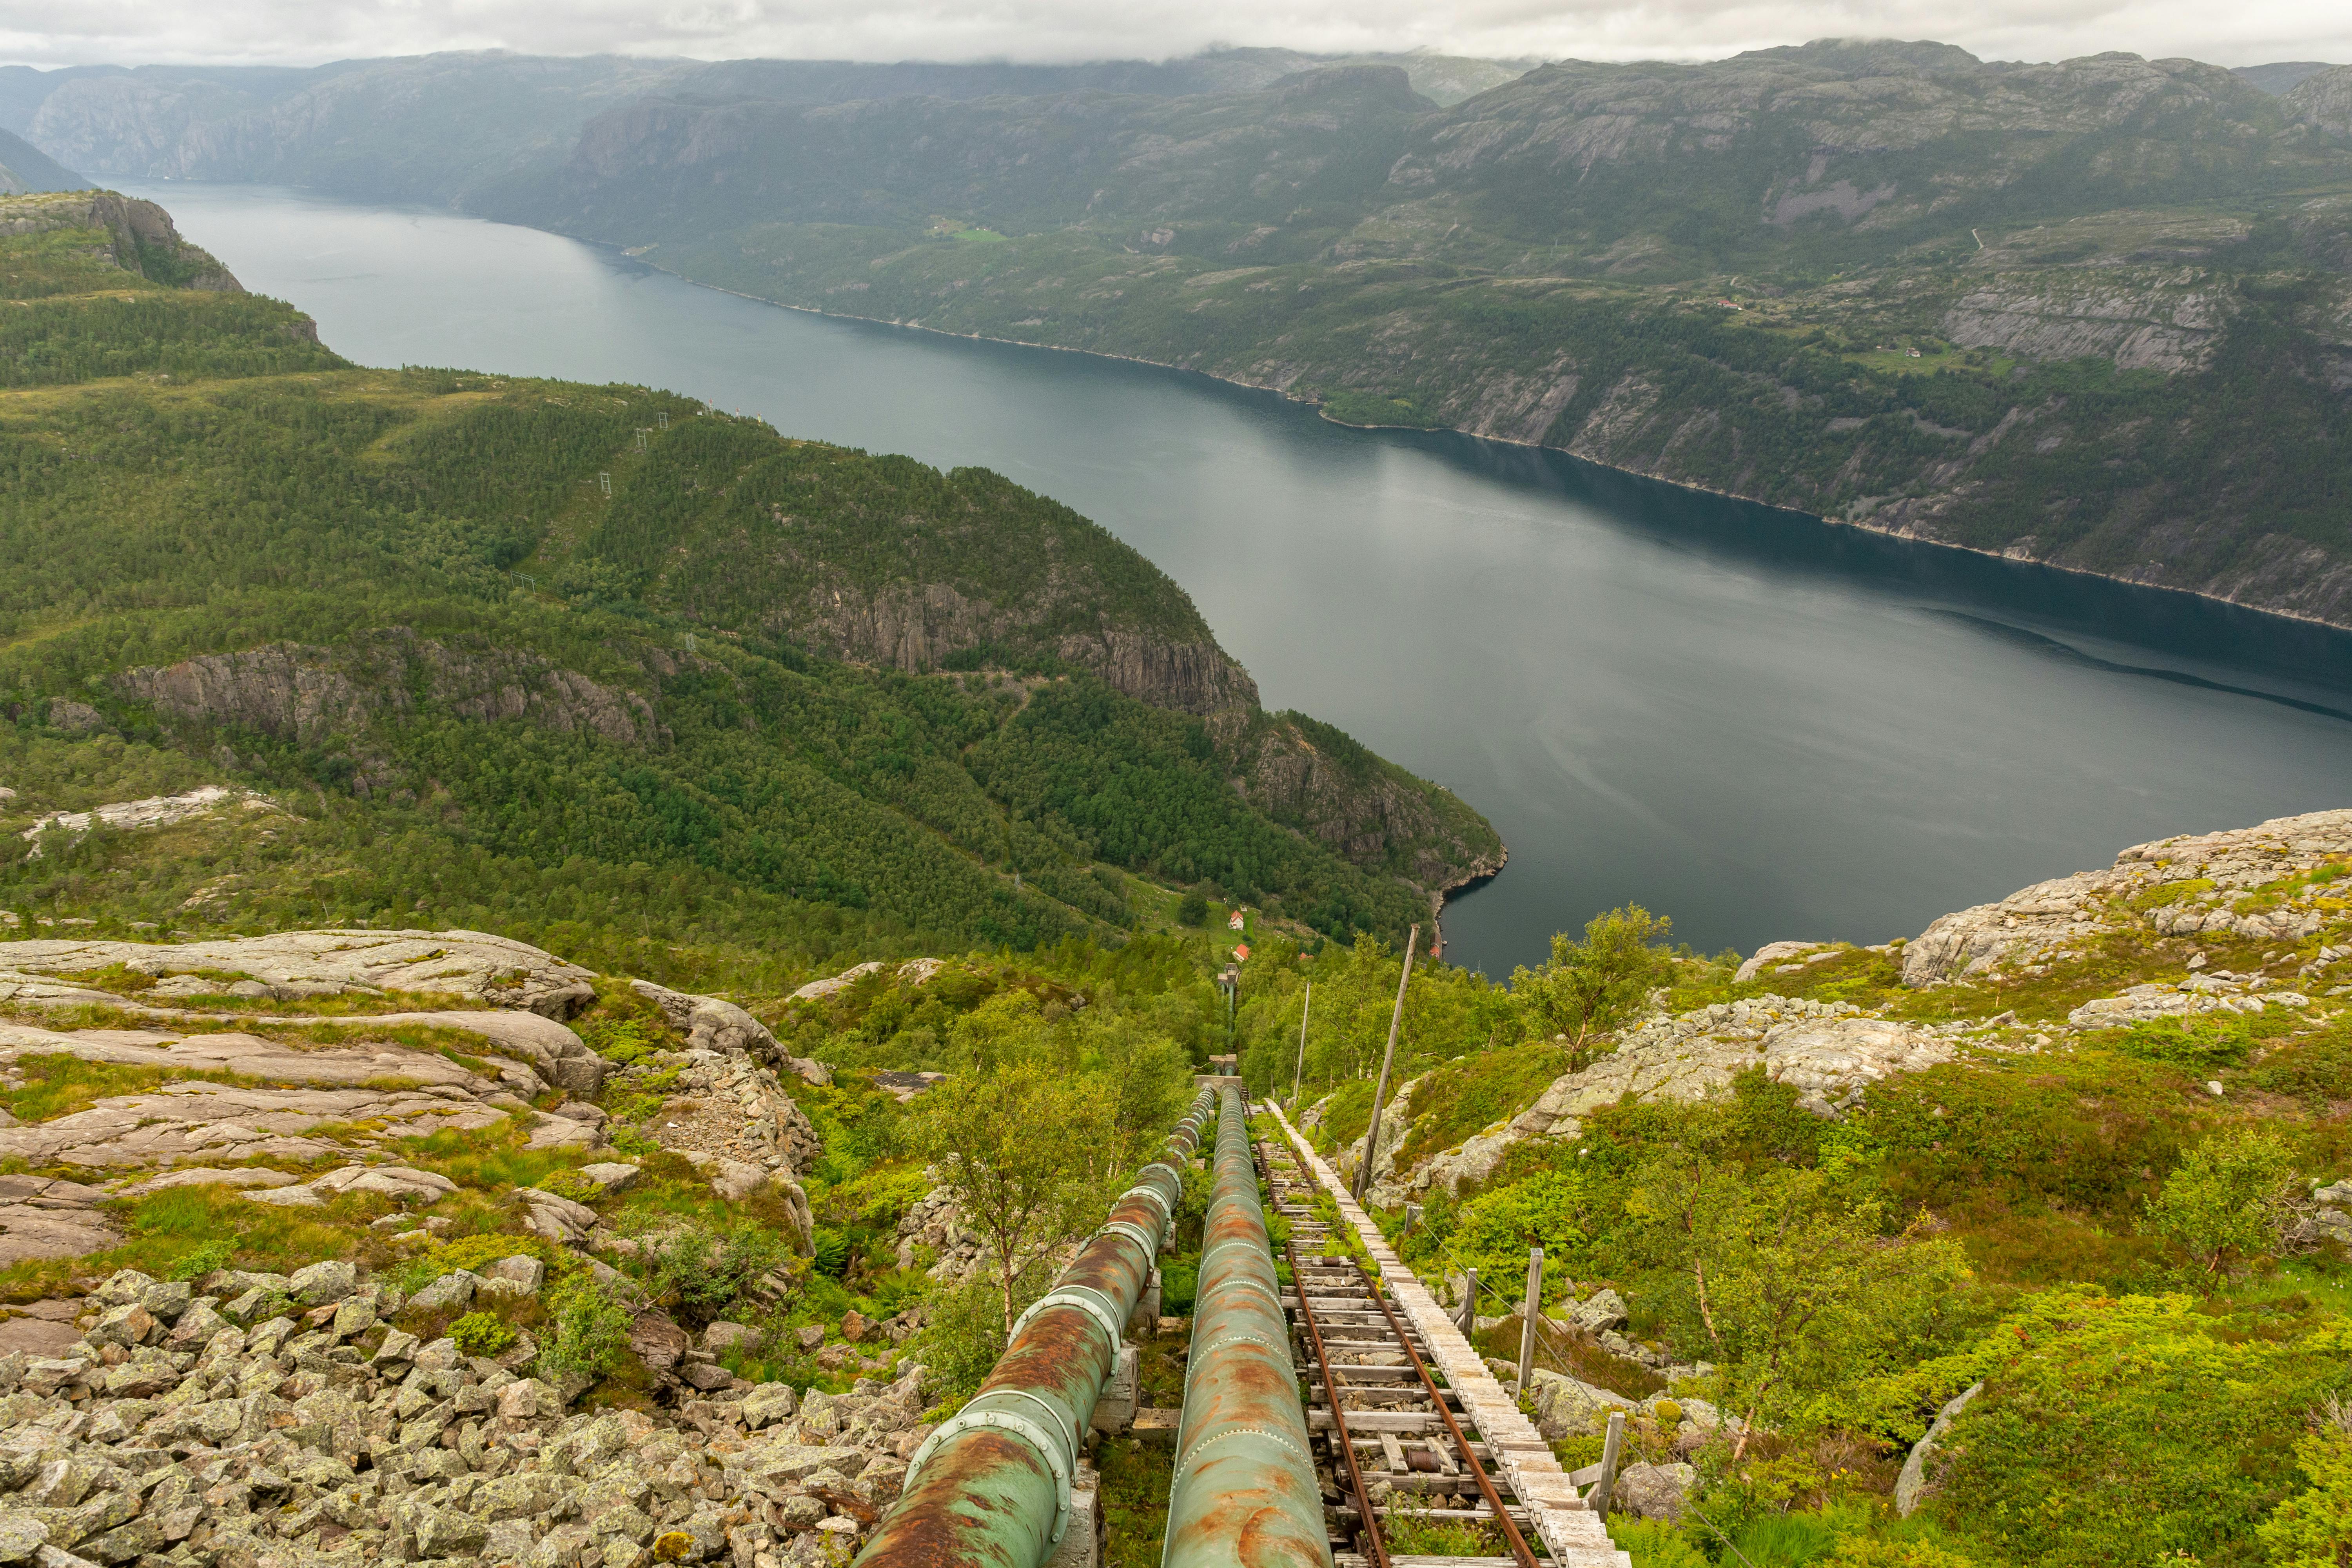 Guided hike to Flørli with 4,444 steps